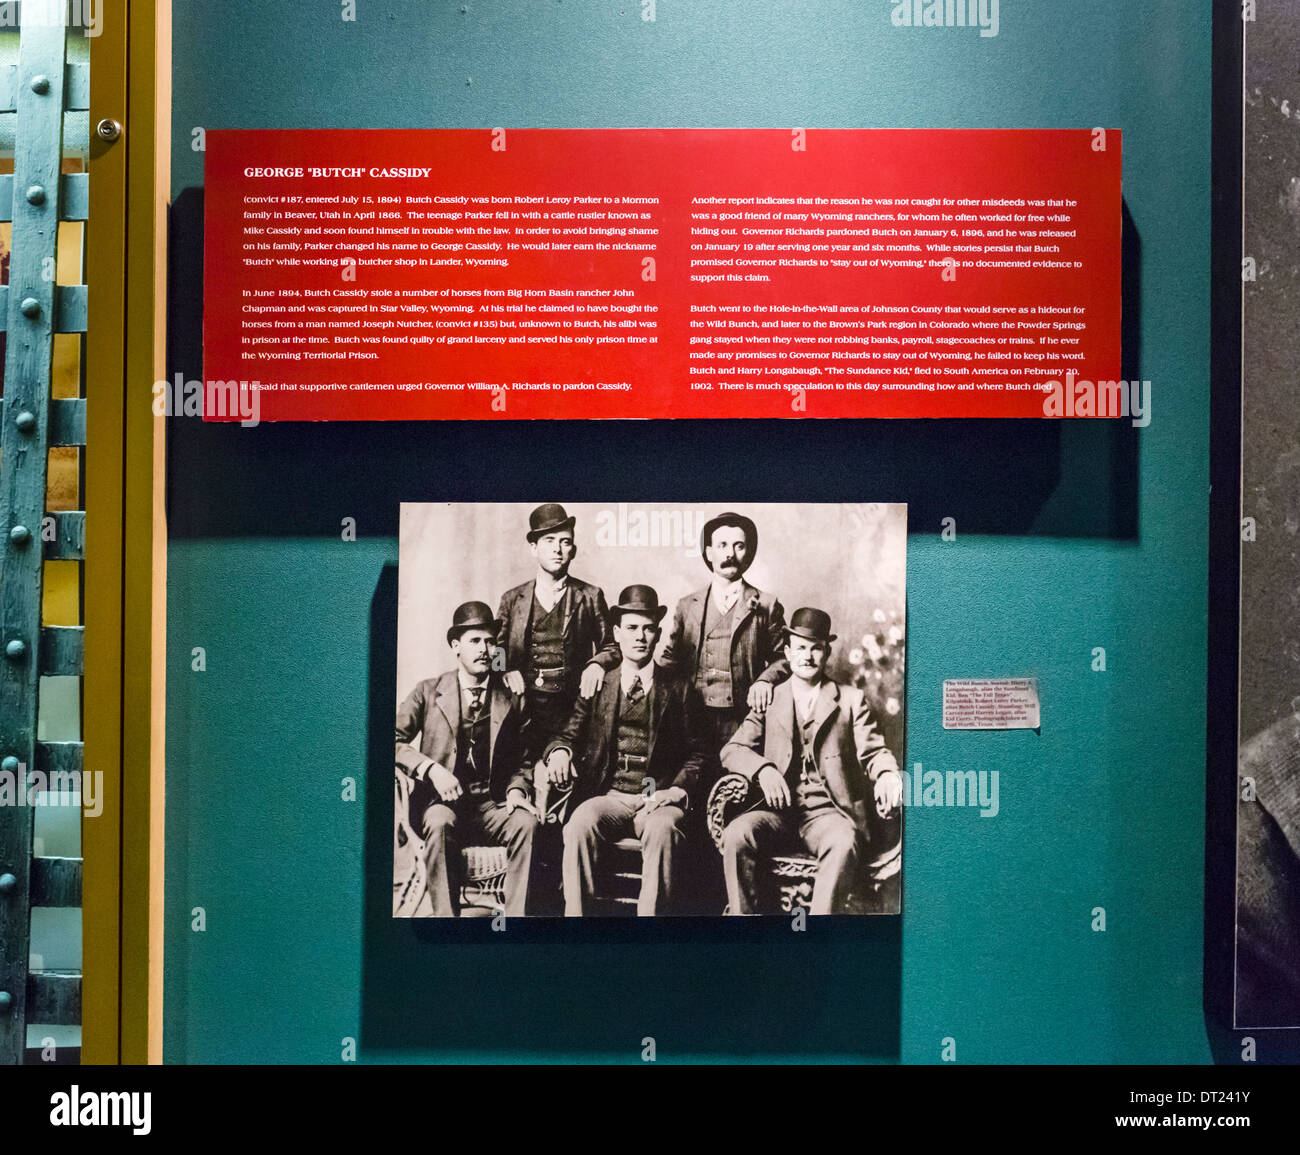 Photo of  Wild Bunch and Butch Cassidy in Wyoming Territorial Prison Museum, where he was imprisoned in 1896, Laramie, WY, USA Stock Photo